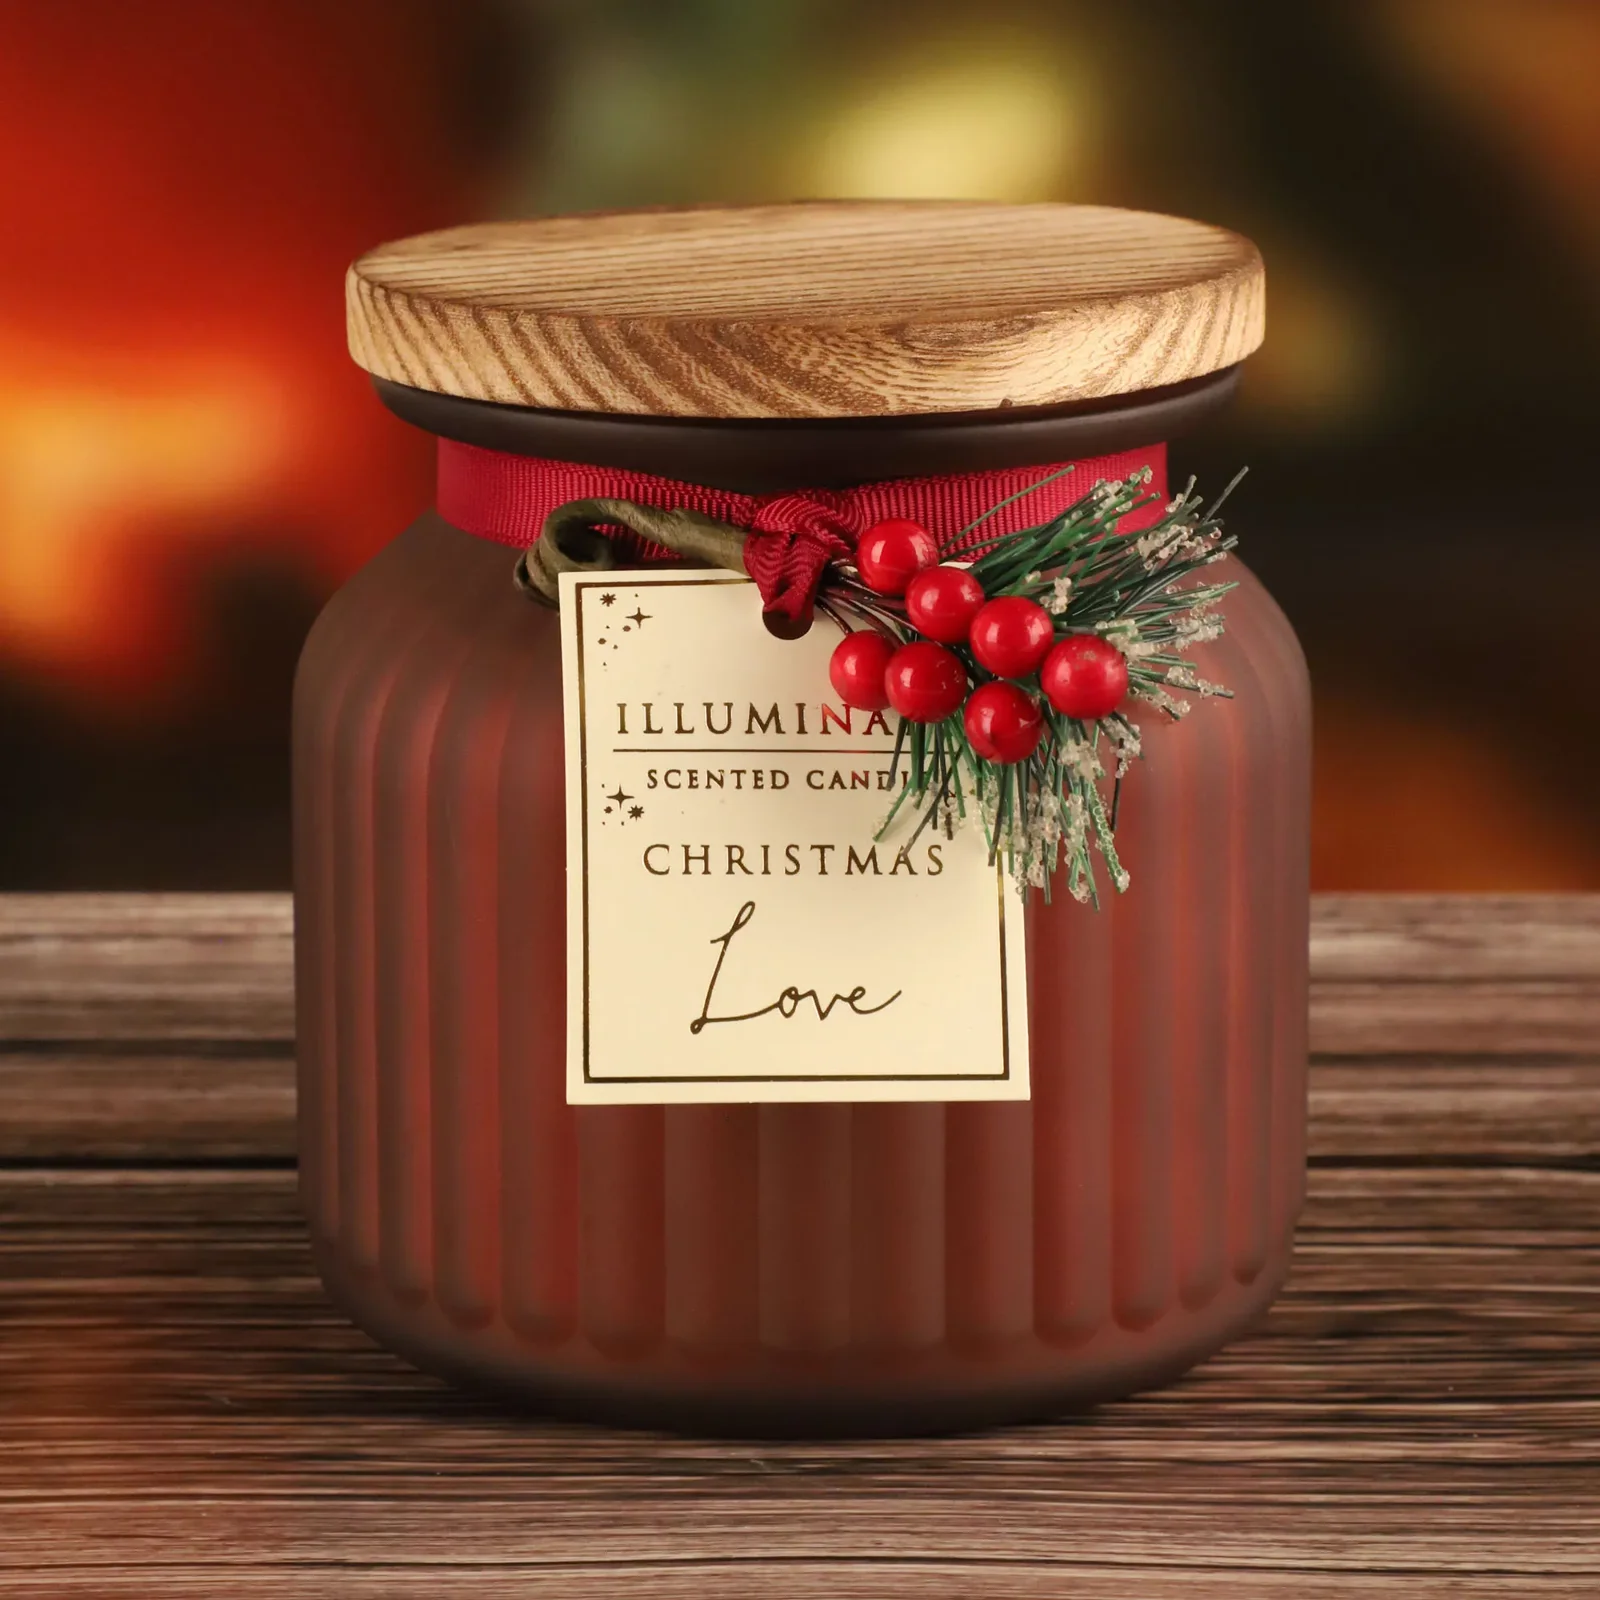 Clintons is selling small Yankee Candles for just 1p when you buy